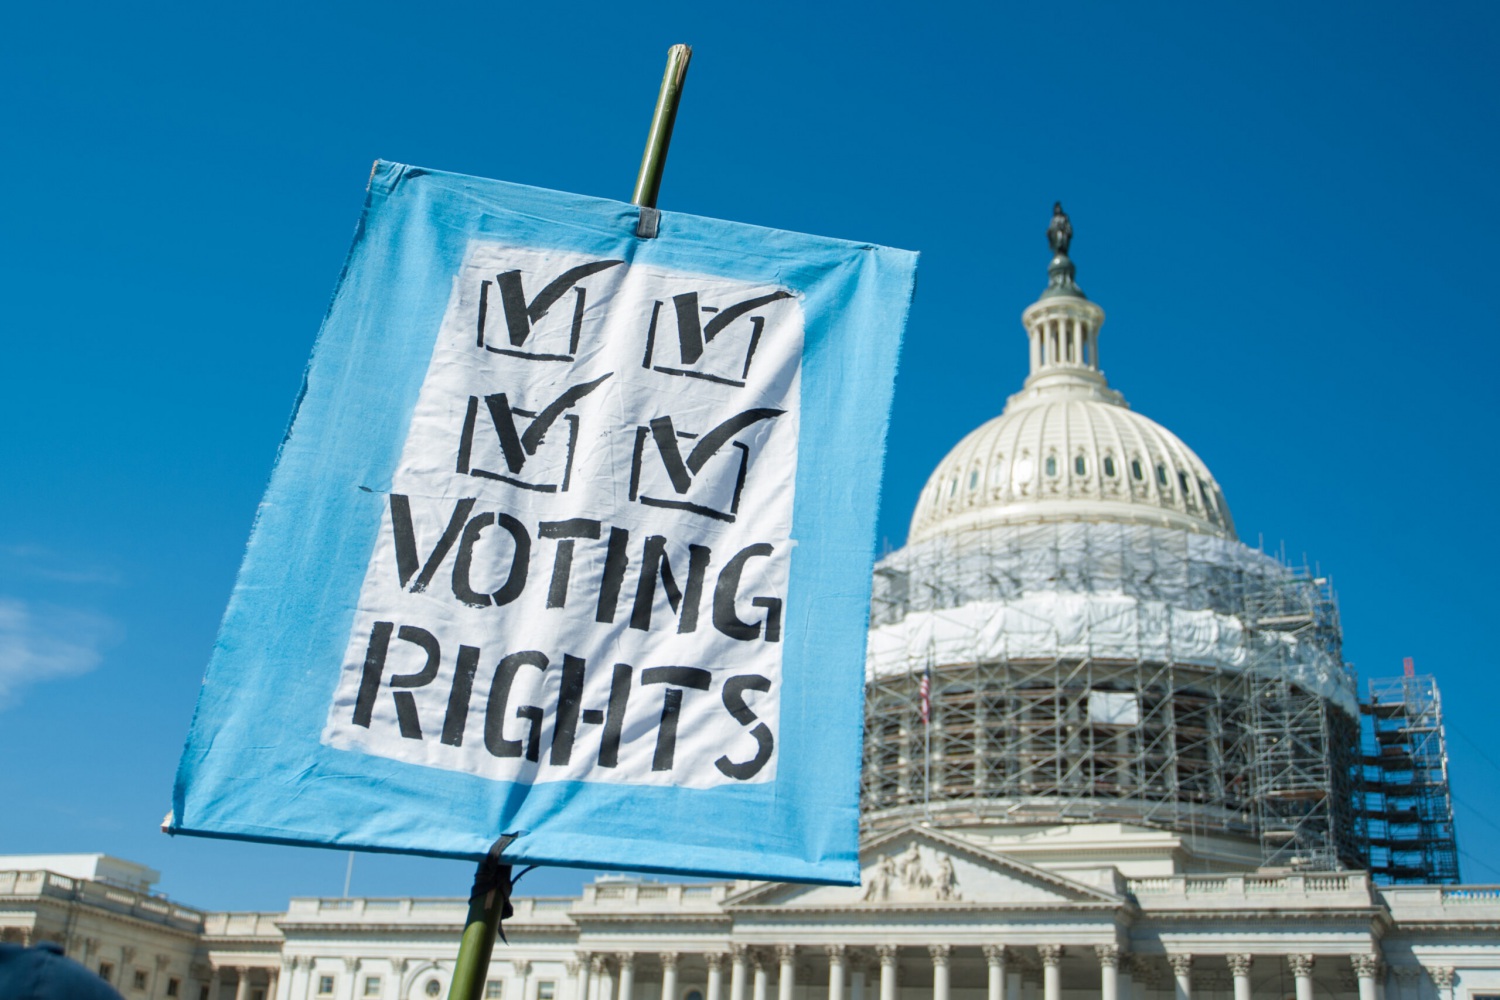 Foreground; A sign with four checkmarks that reads "Voting Rights" Background: The Capitol building under construction